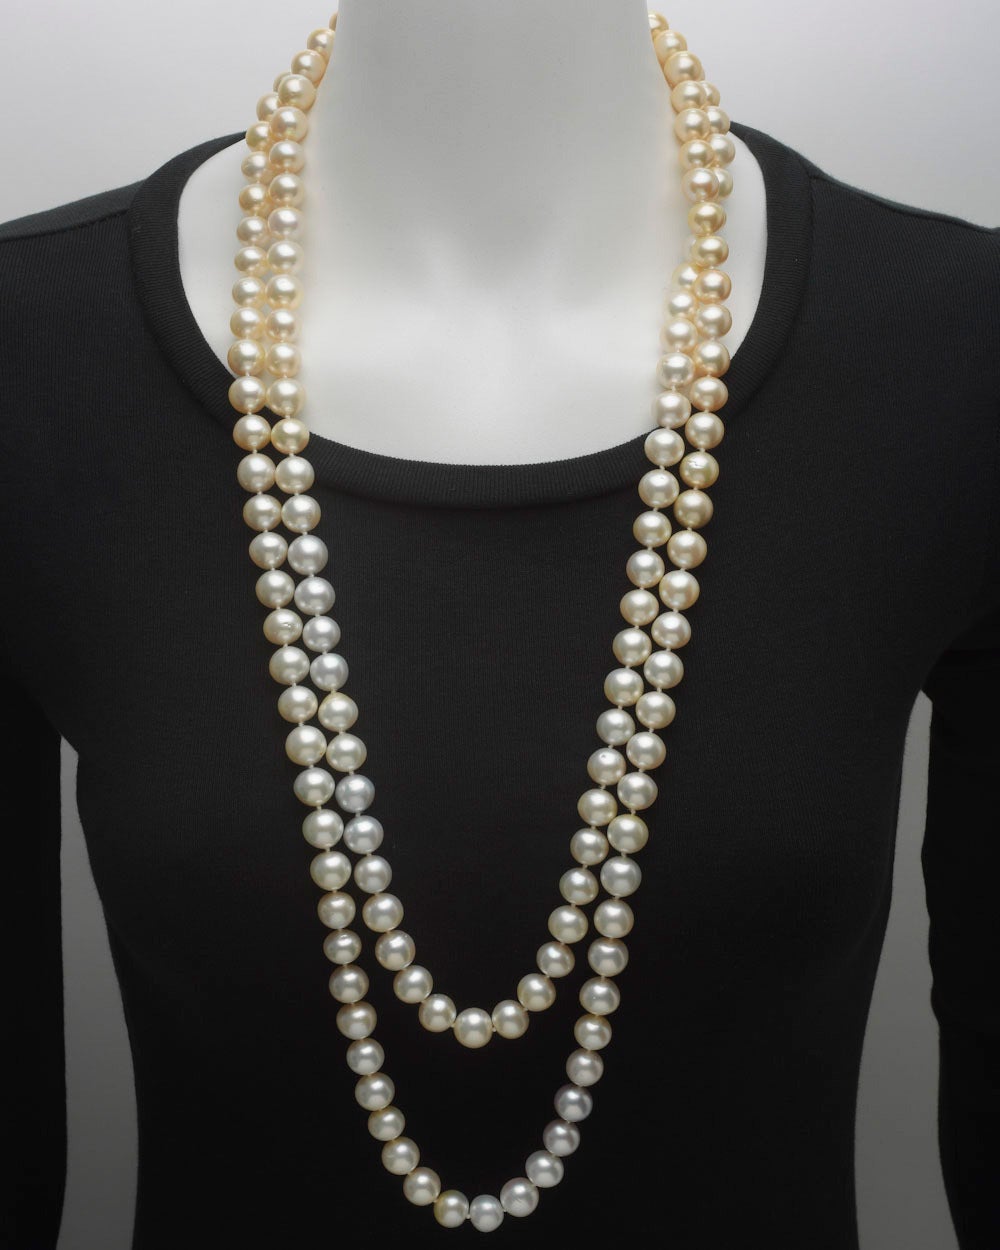 Cultured South Sea pearl long wrap necklace, composed of 146 multicolored South Sea pearls with diameters ranging from 12mm to 11mm, the pearls slightly baroque in shape with colors ranging from golden yellow and creamy white to slightly bluish